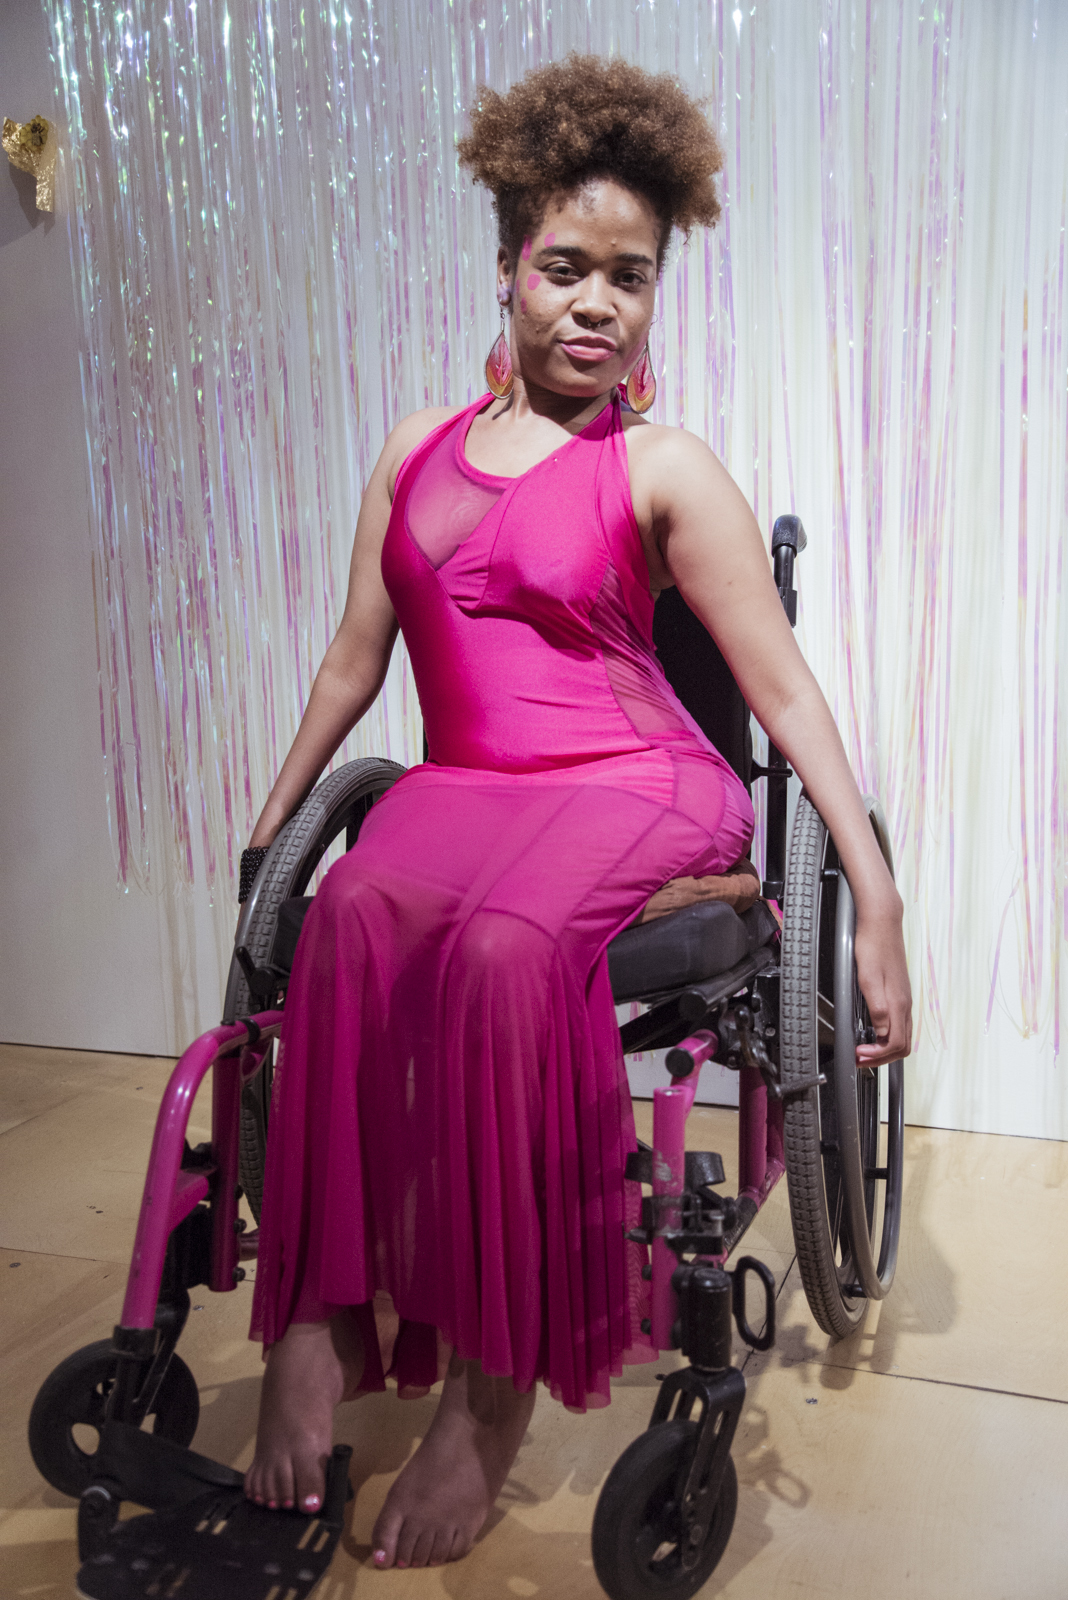 Dee Rae Glass rocks a hot pink dress that matches her wheelchair, while stylishly going barefoot. Photo credit Kiam Marcelo Junio.